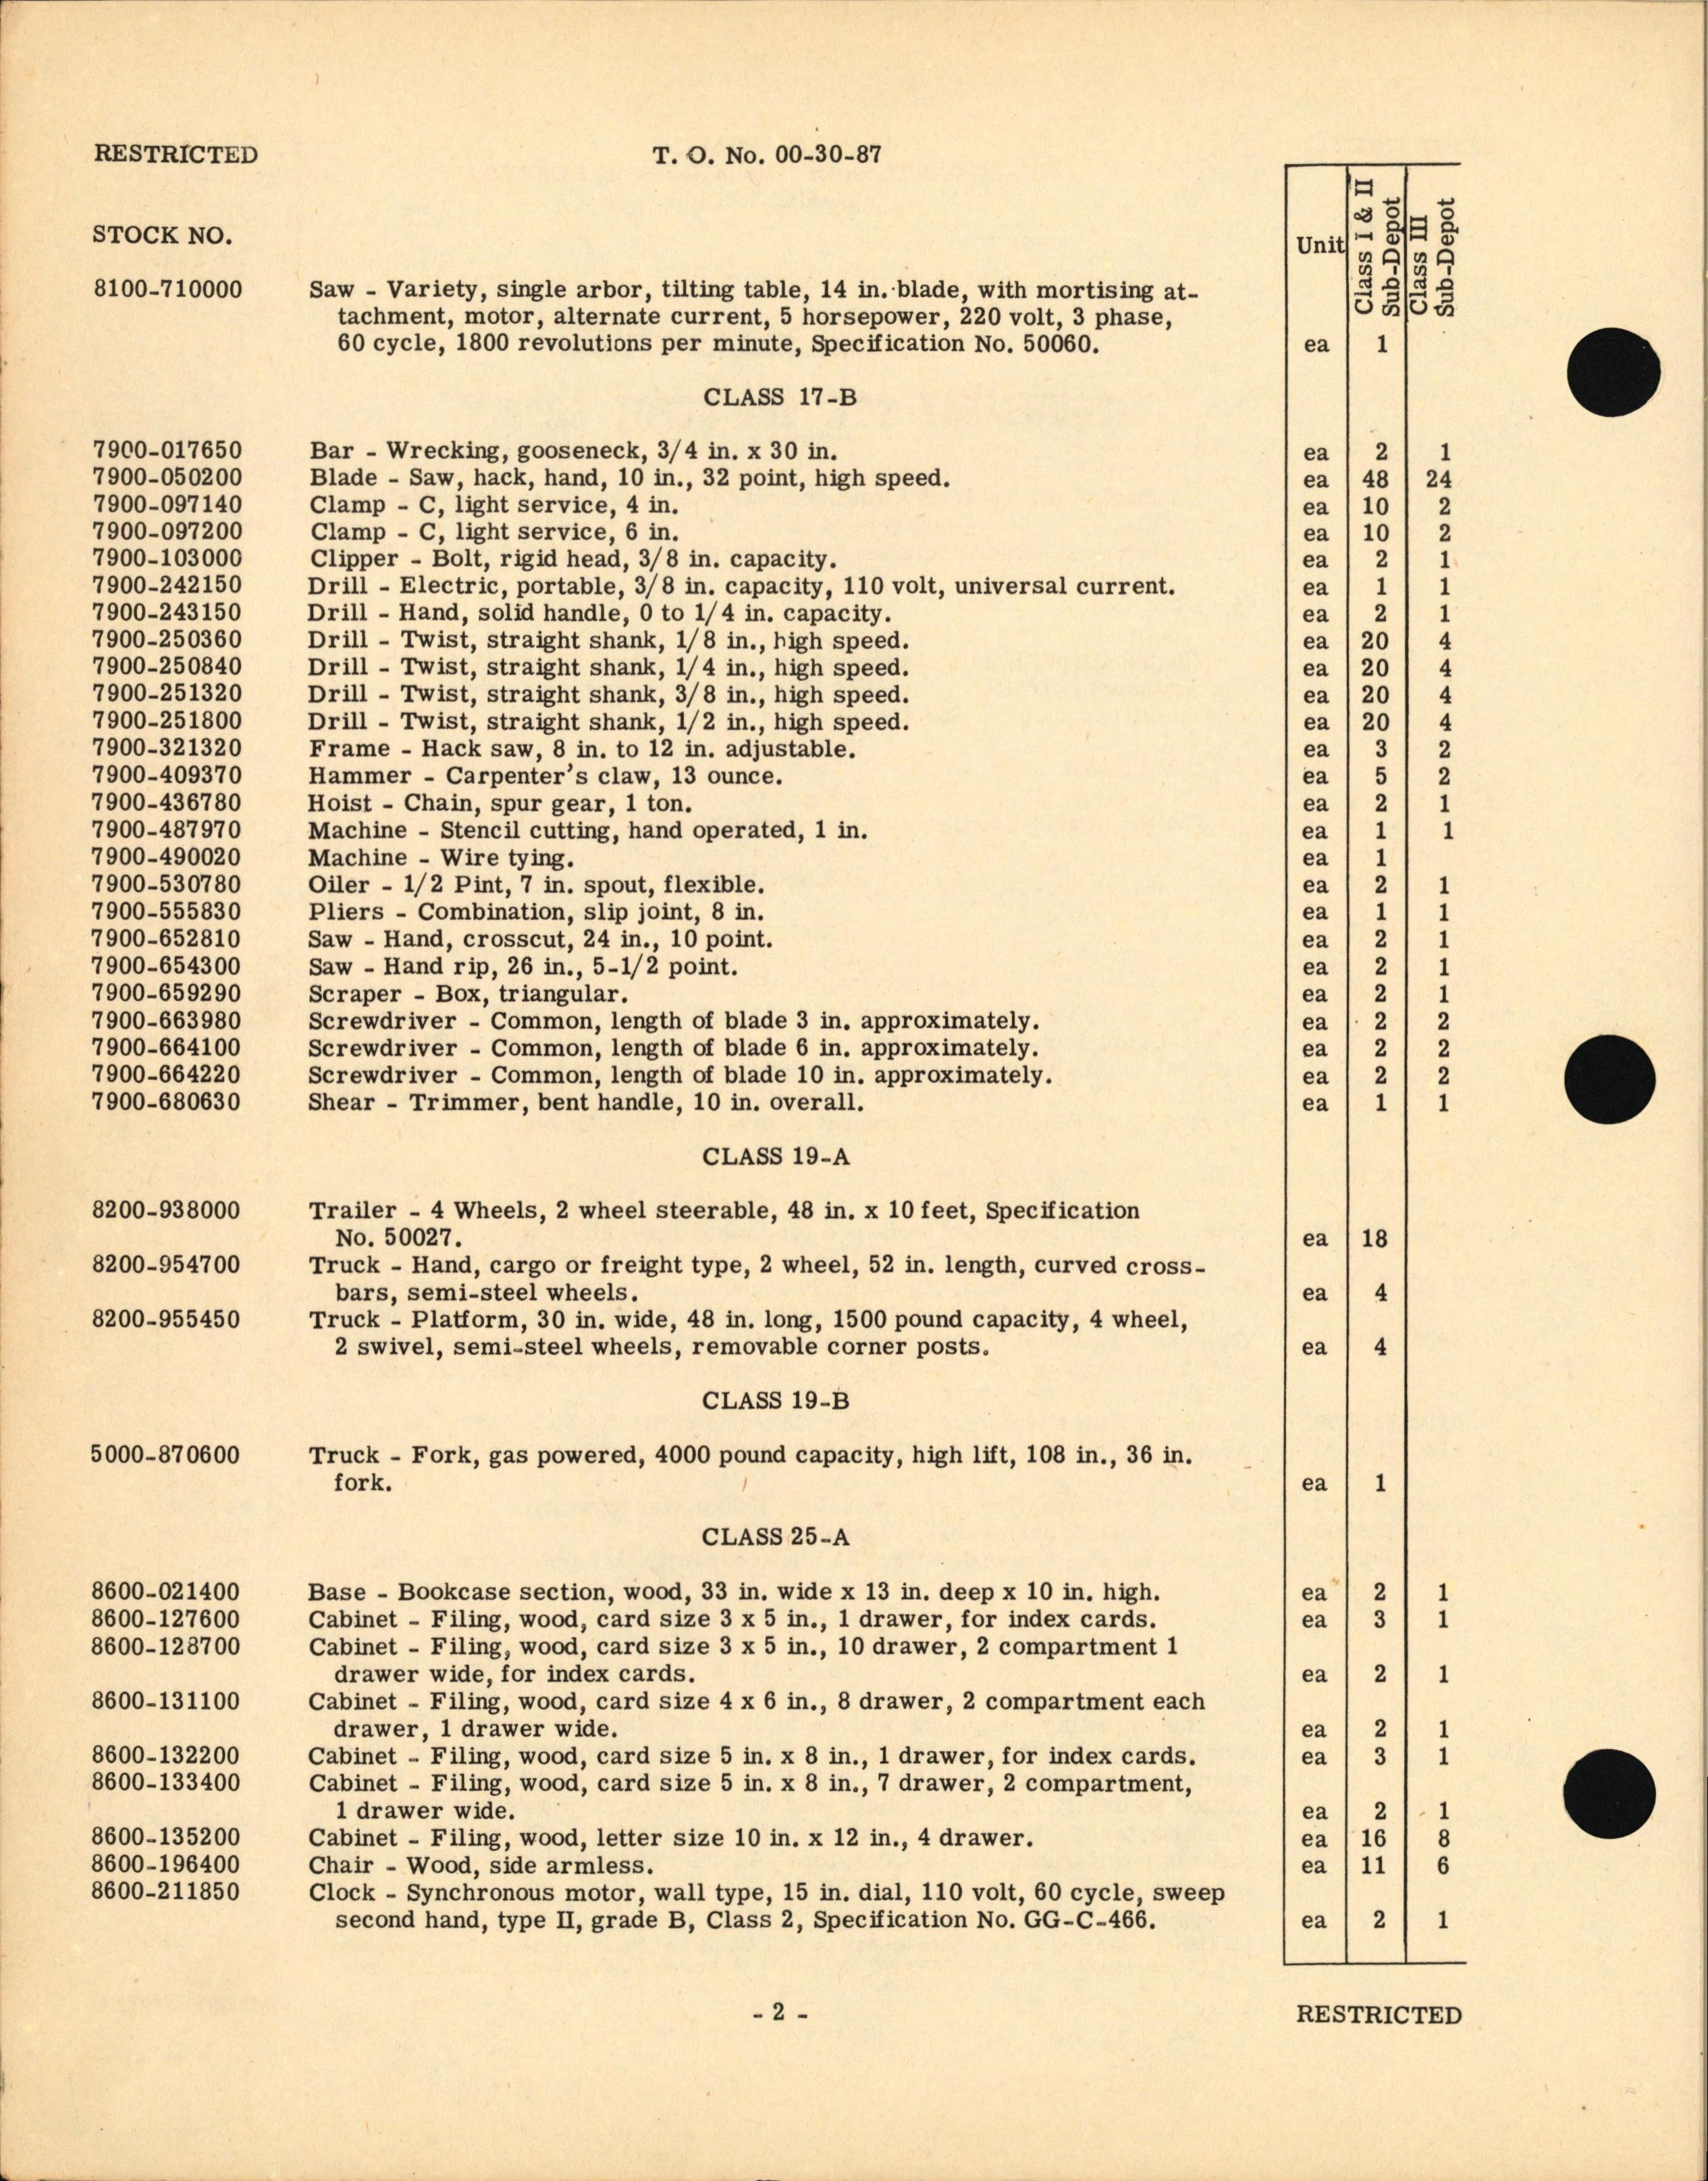 Sample page 2 from AirCorps Library document: Equipment Set, Sub-Depot Supply